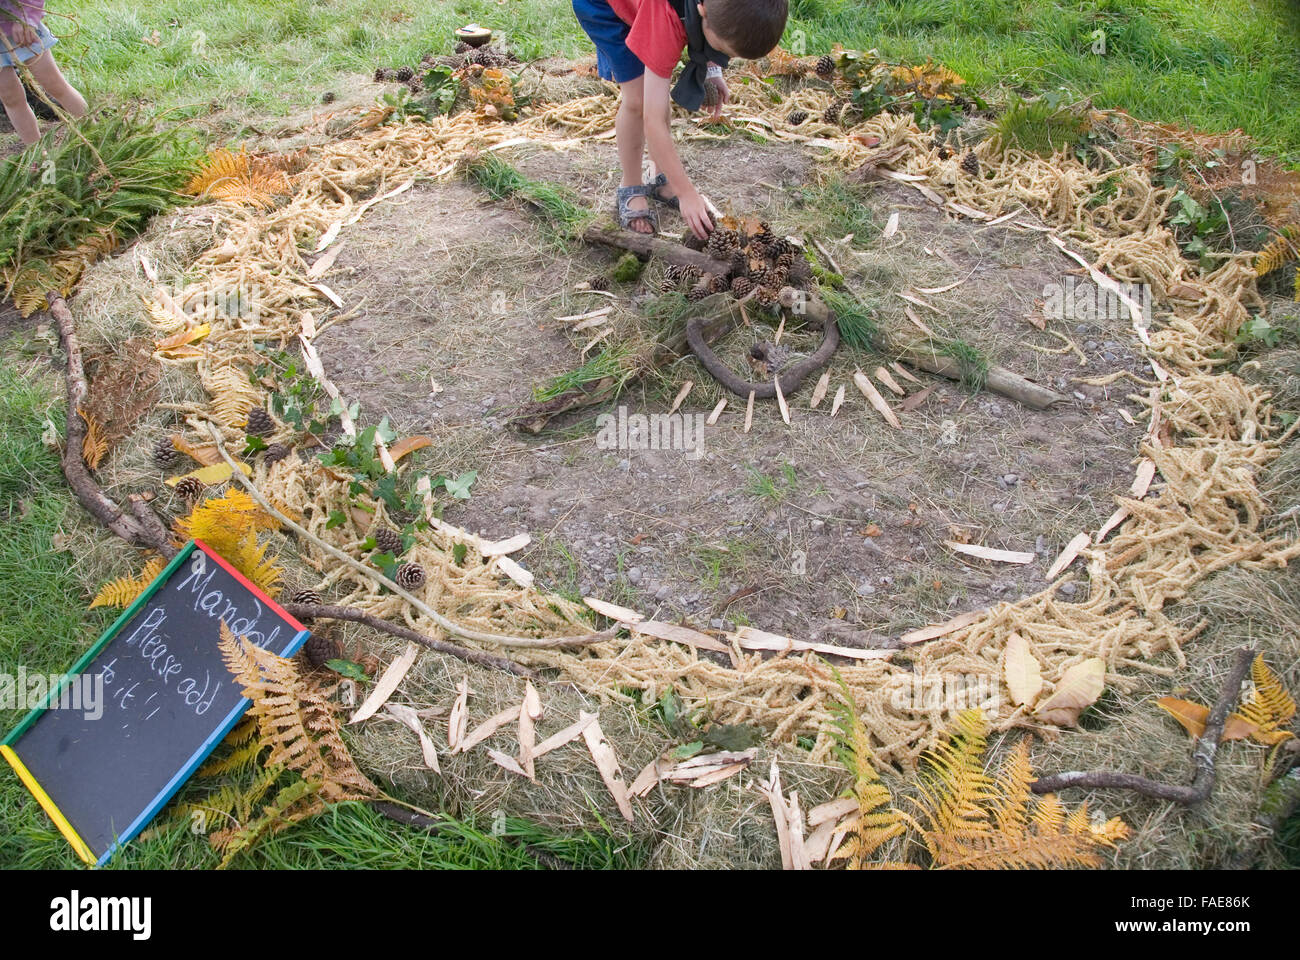 CHEPSTOW, WALES - July 2014: Boy adding to a Mandala circle created with natural items on 31 July at the Green Gathering Festiva Stock Photo